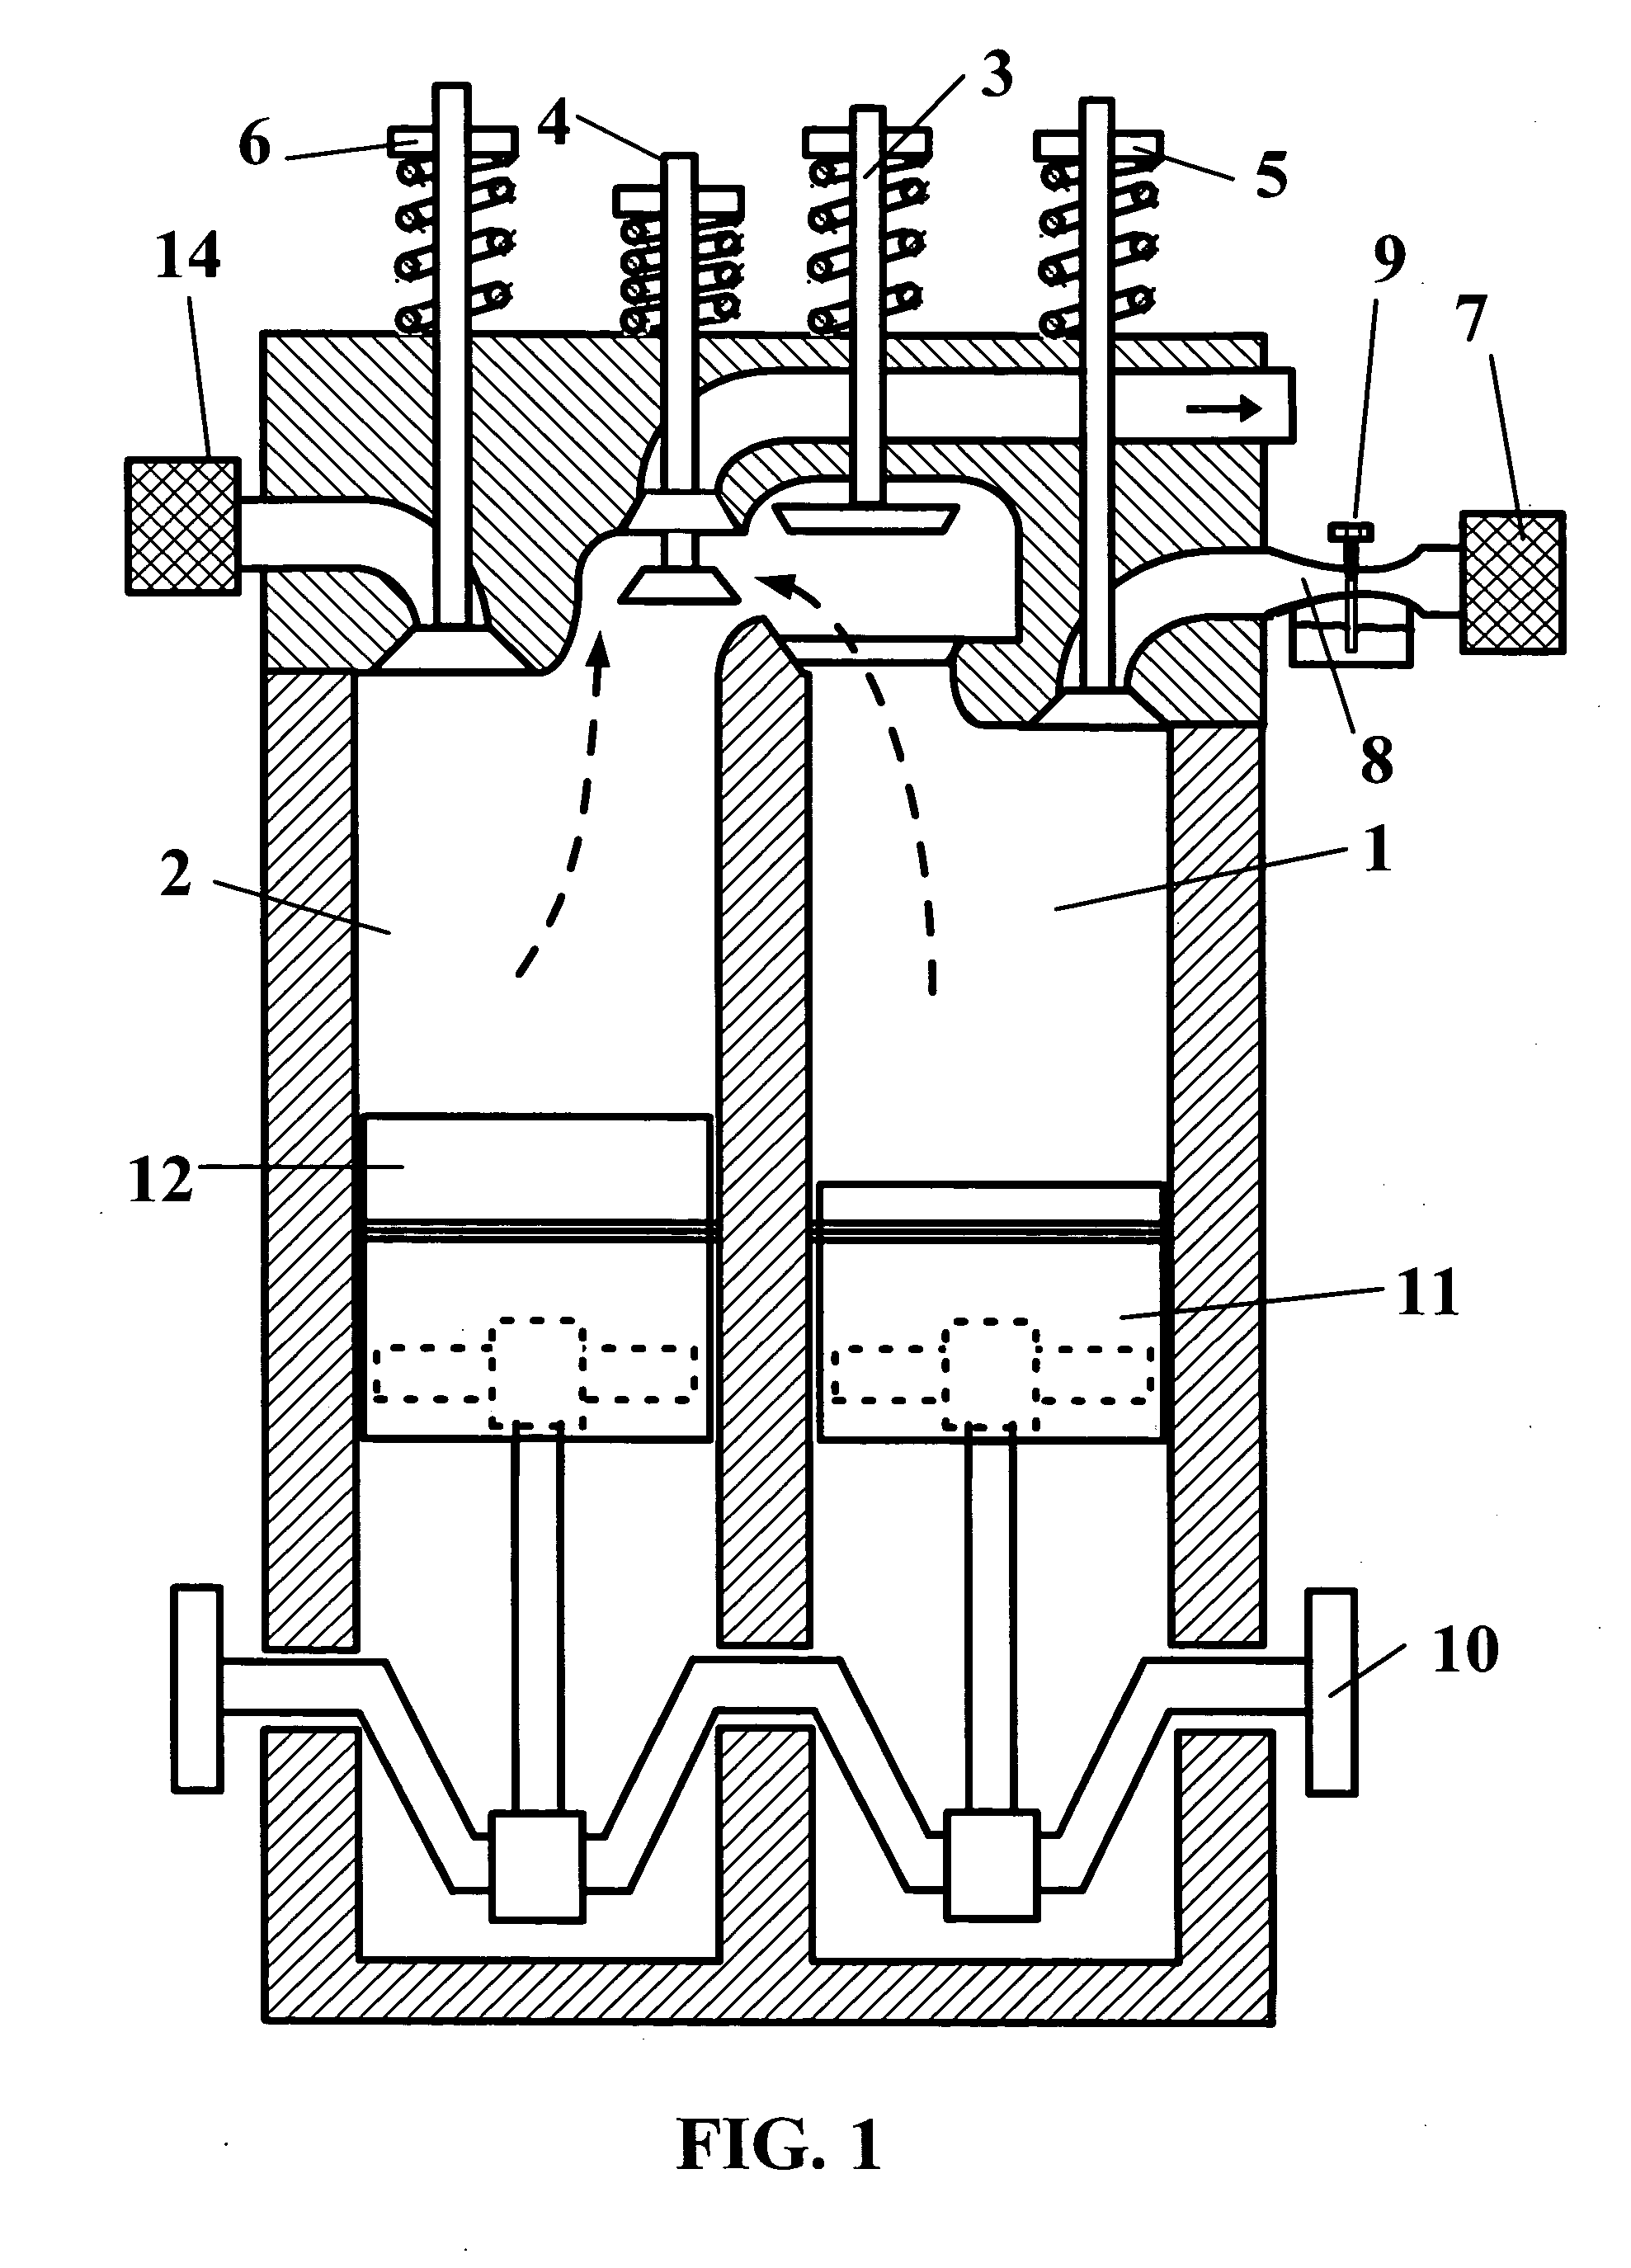 Compression ignition engine by air injection from air-only cylinder to adjacent air-fuel cyliner